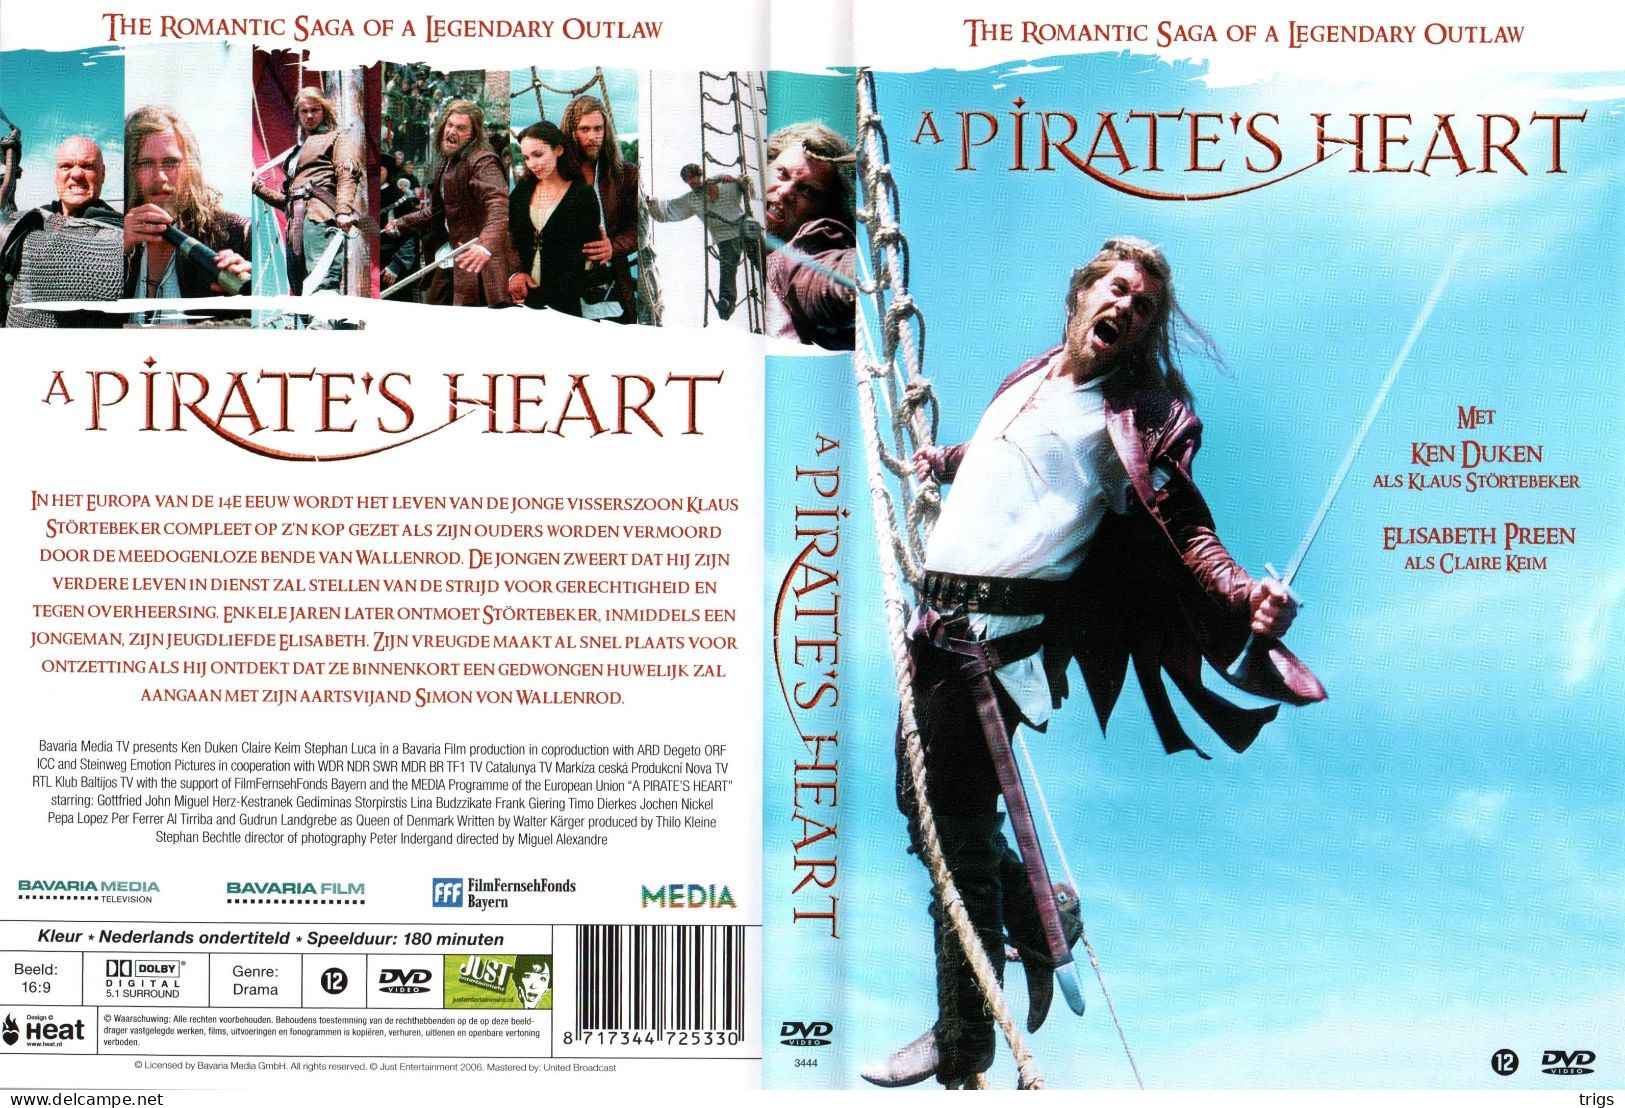 DVD - A Pirate's Heart - Action, Adventure